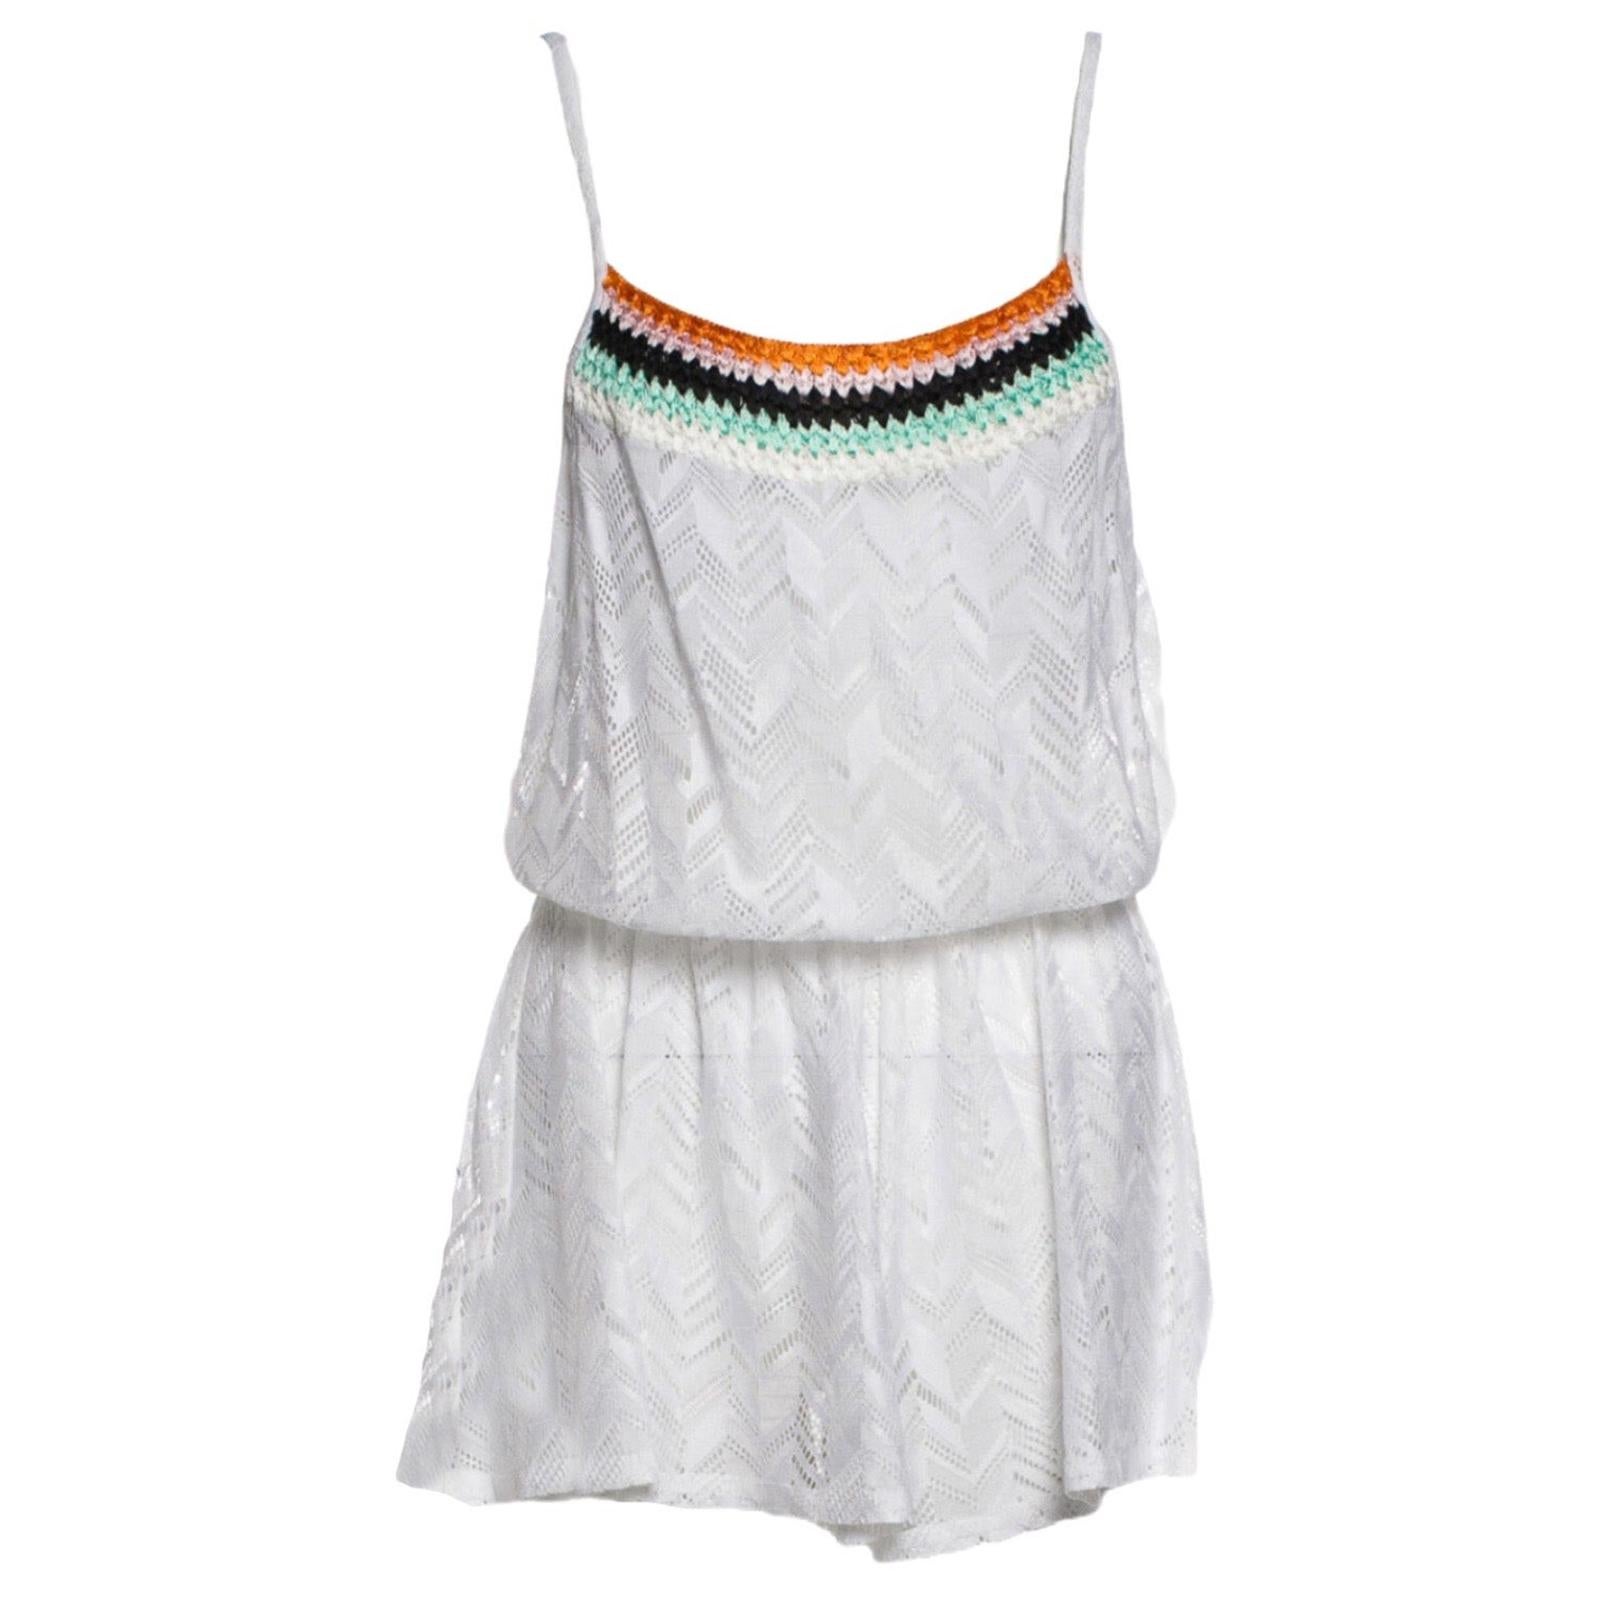 NEW Missoni Ruched Crochet Knit Playsuit Romper Mini Jumpsuit Overall